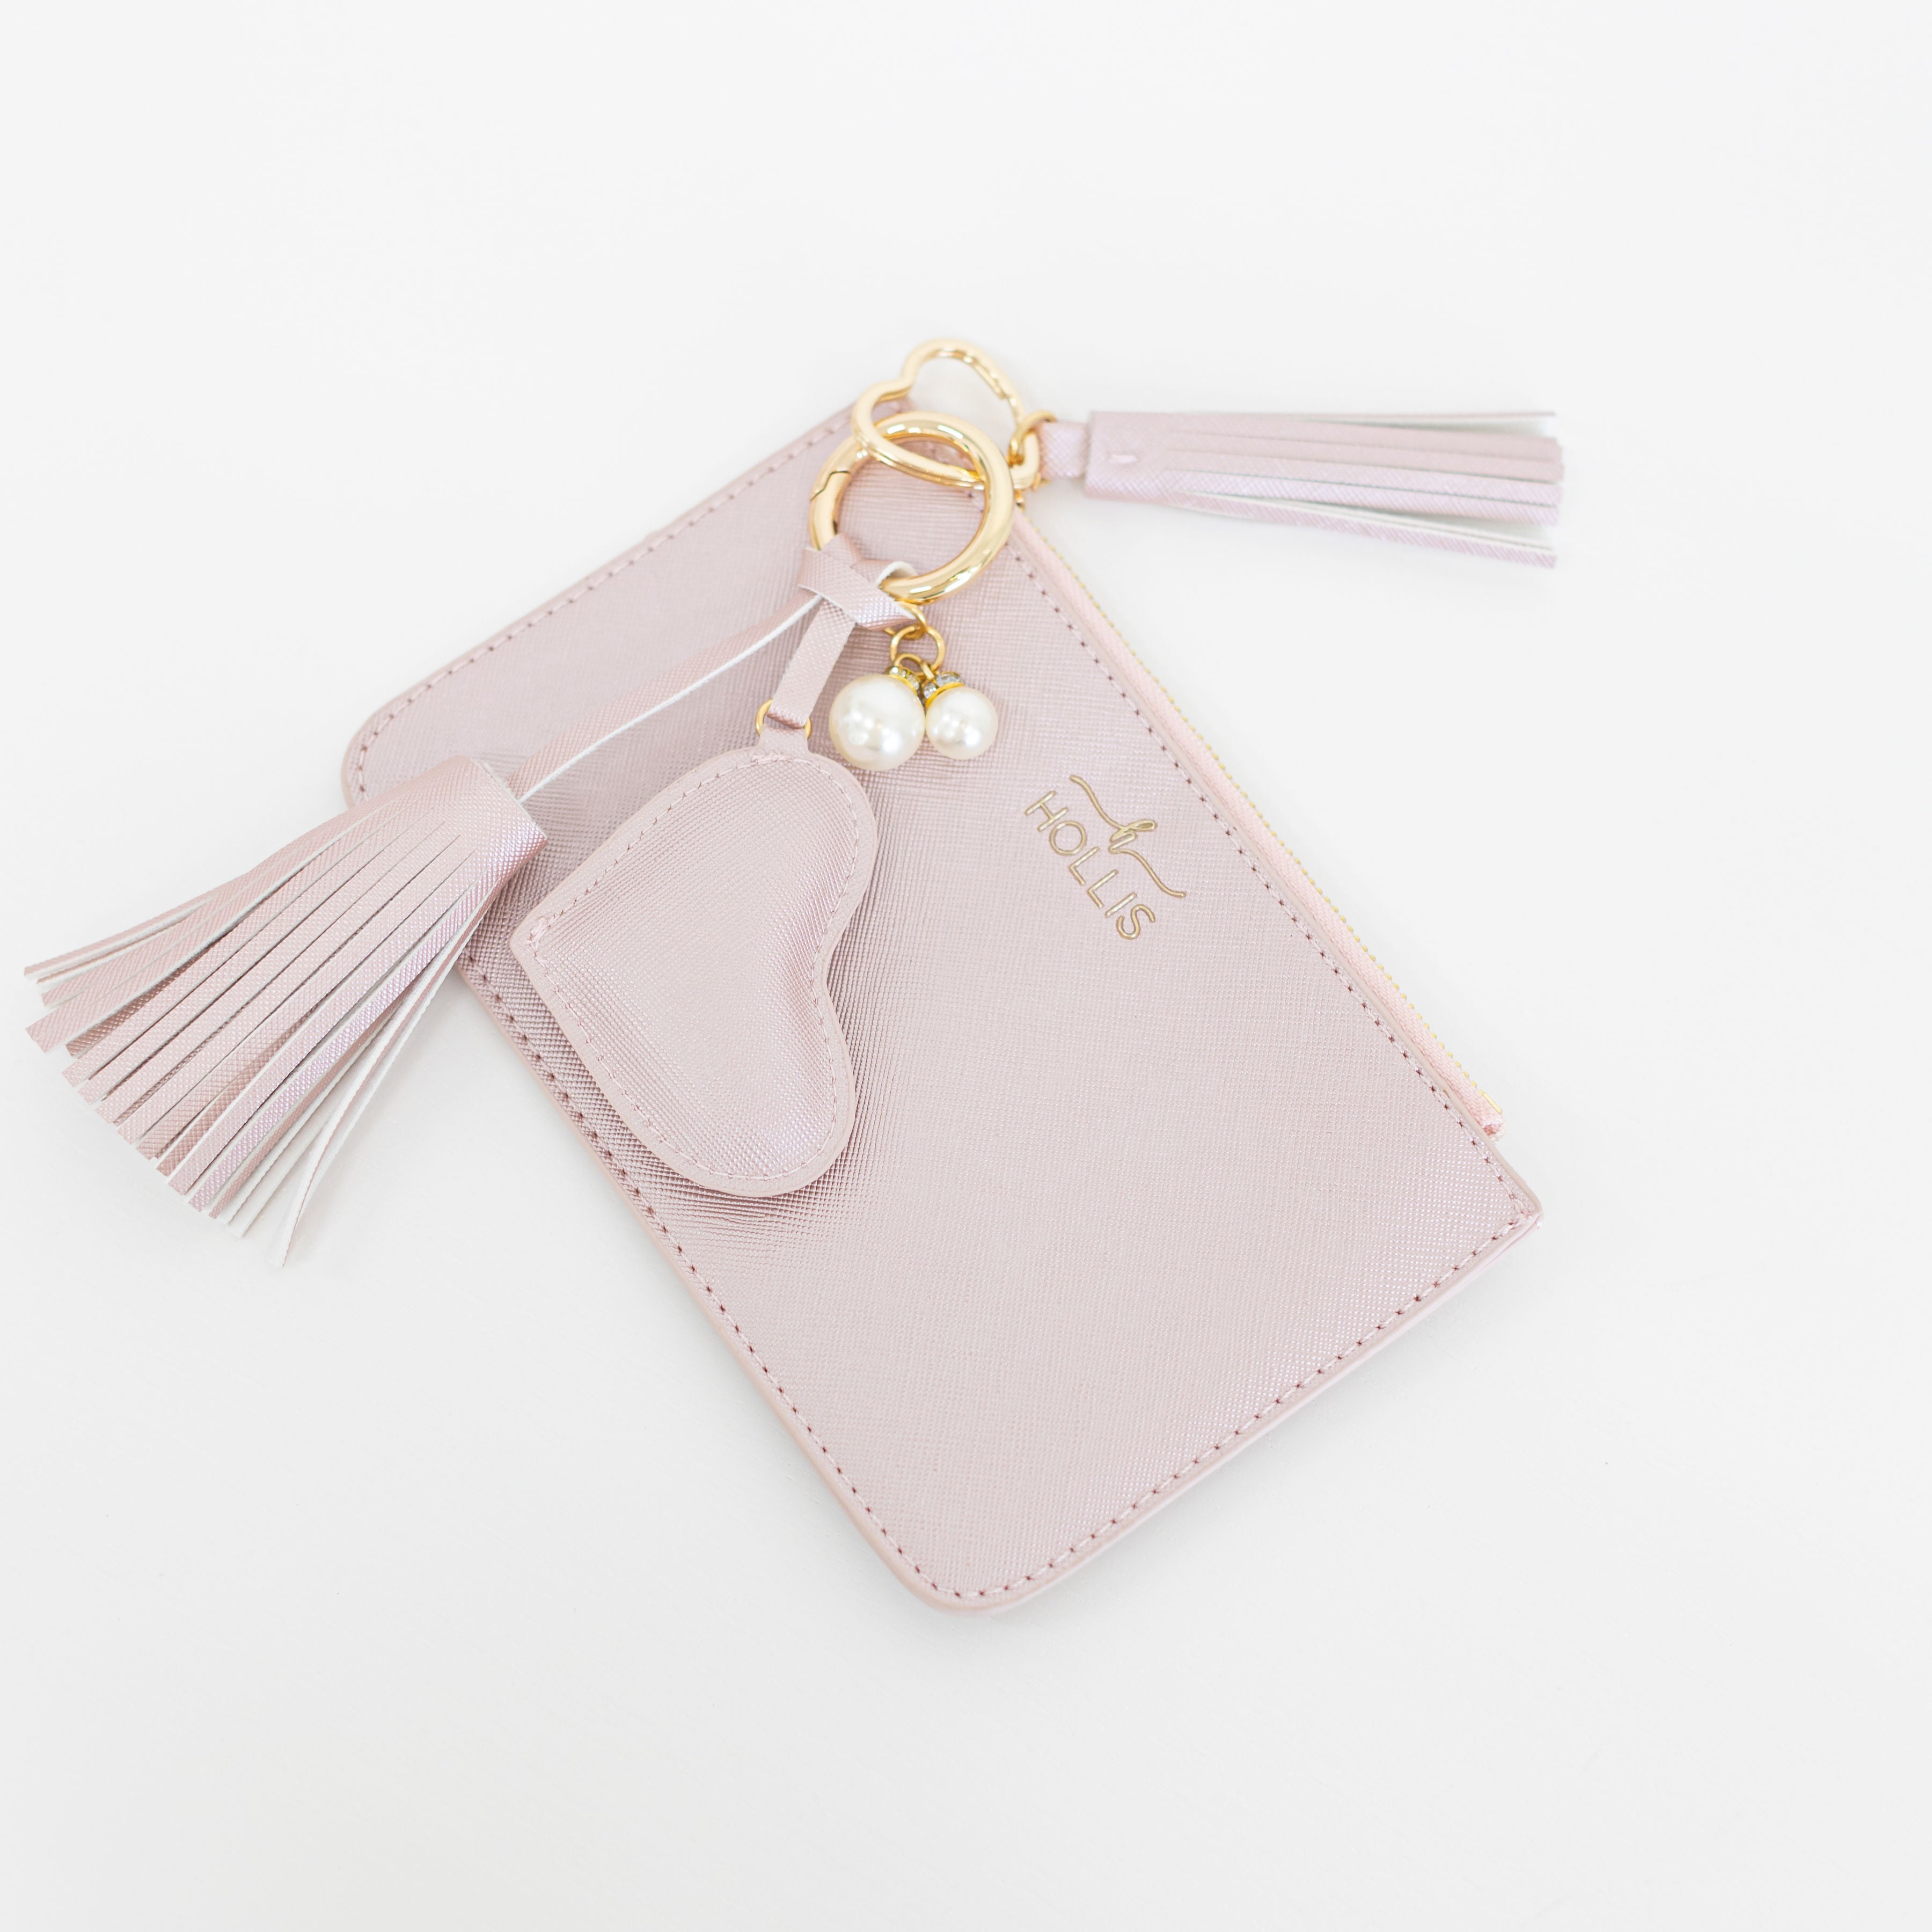 Wyweilie - Faux Leather Coin Purse Keyring | YesStyle